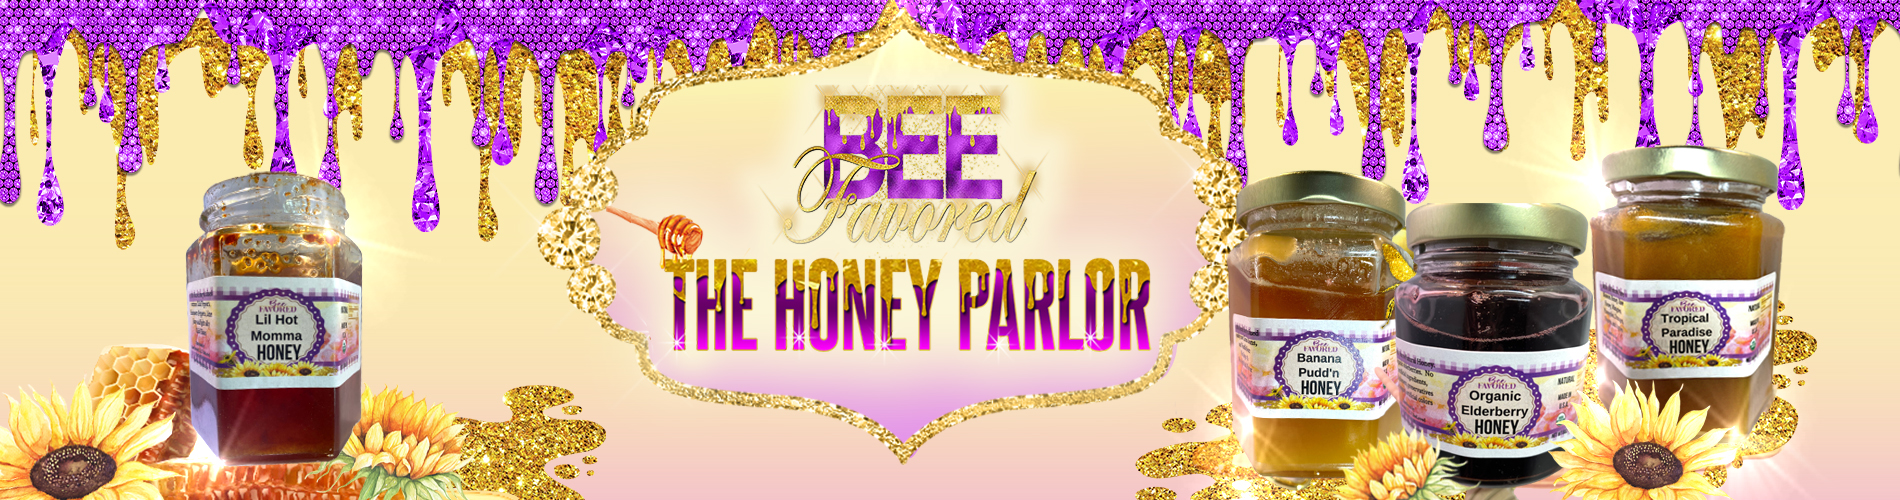 BeeFavored's banner